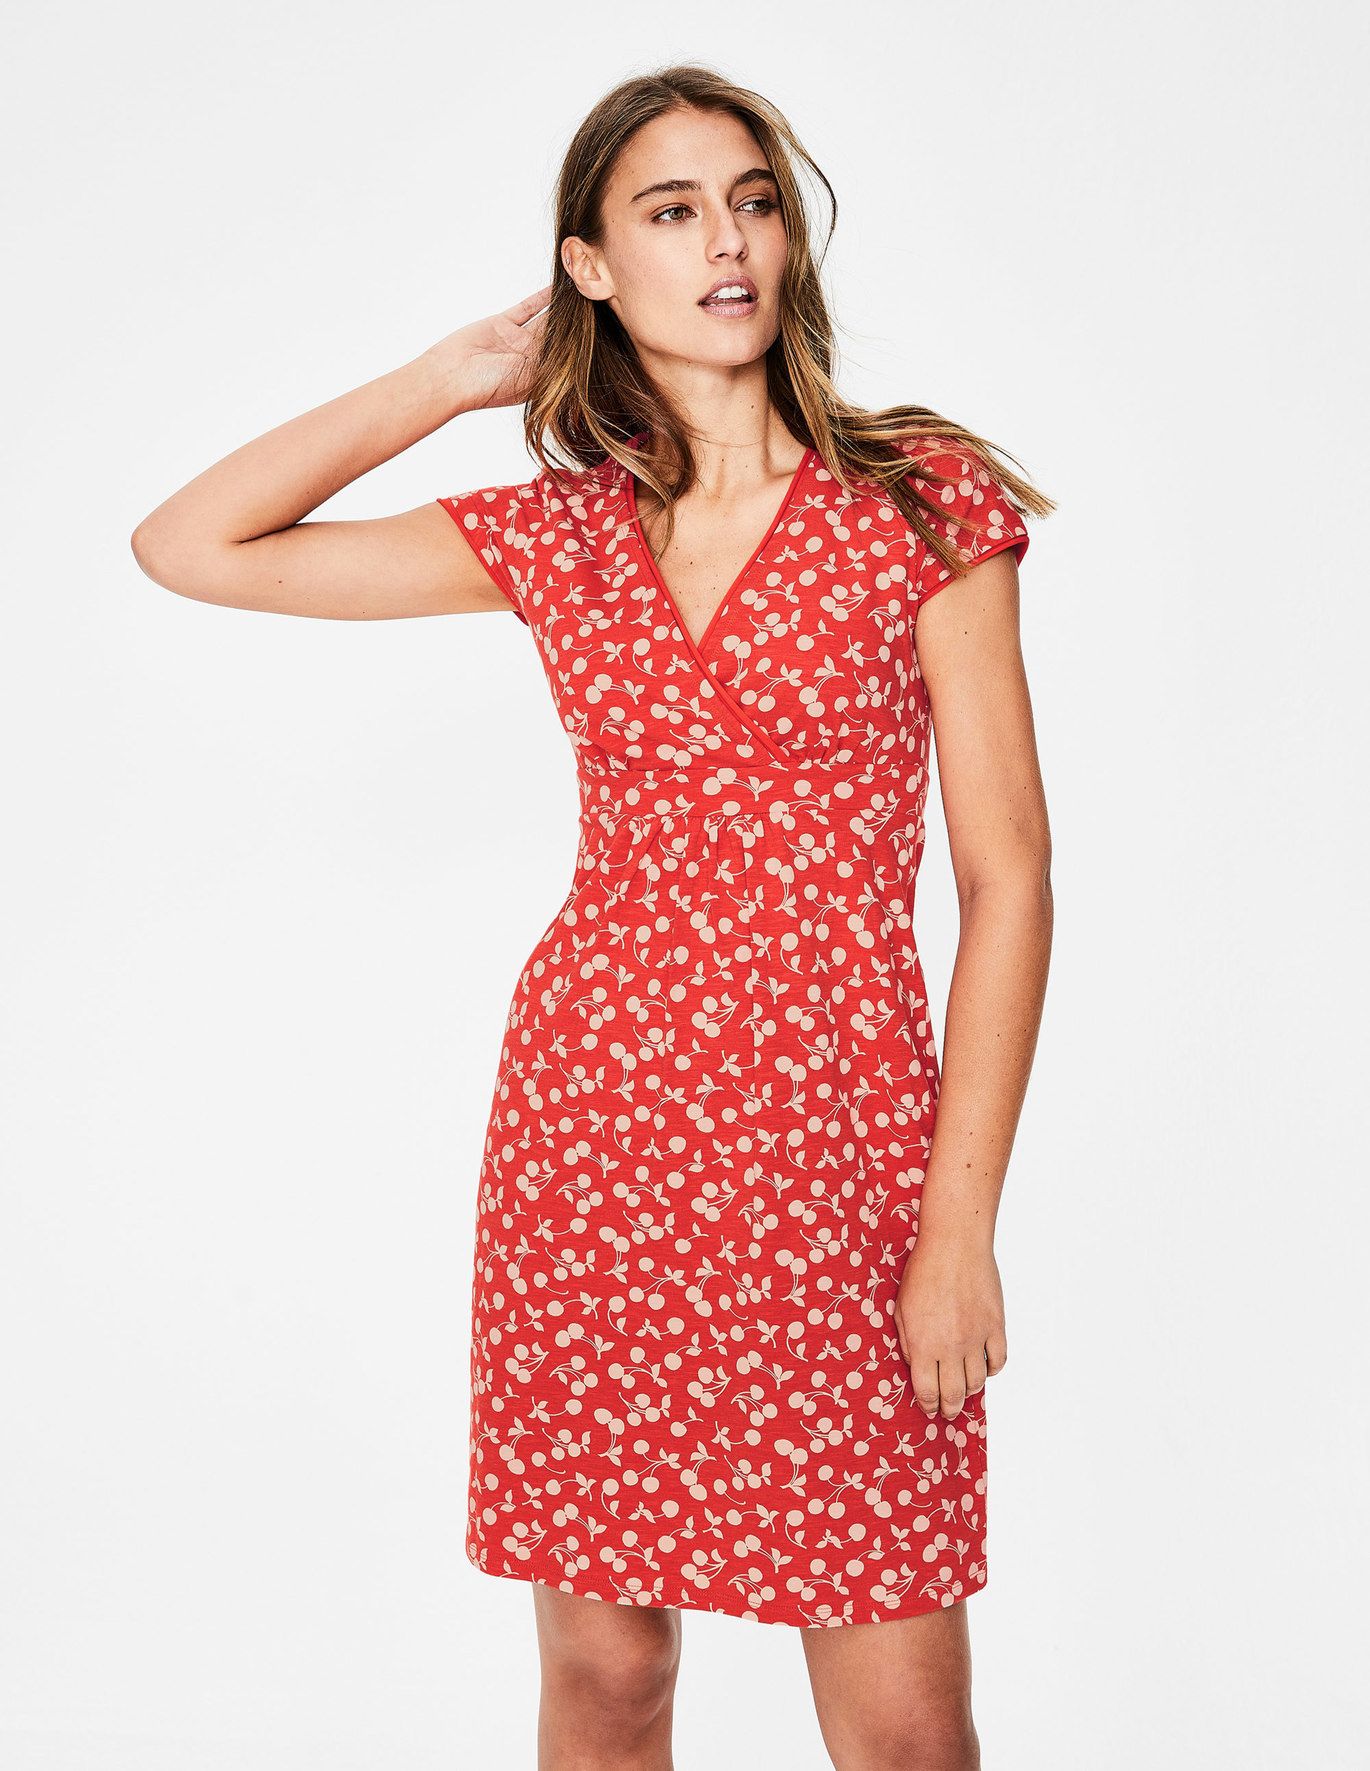 14 gorgeous summer dresses from Boden